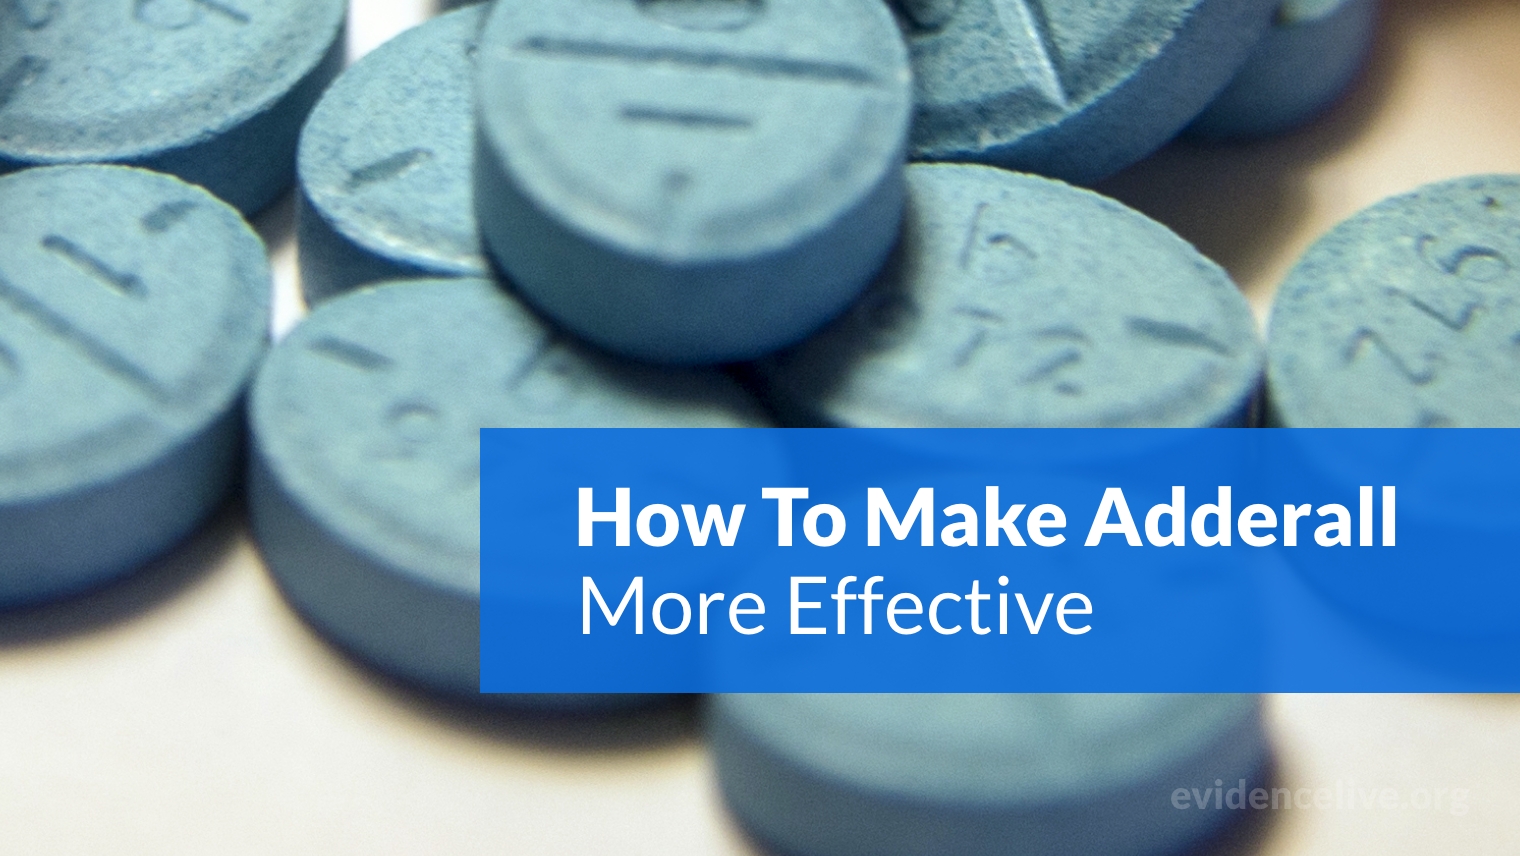 How To Make Adderall More Effective, Stronger & Last Longer